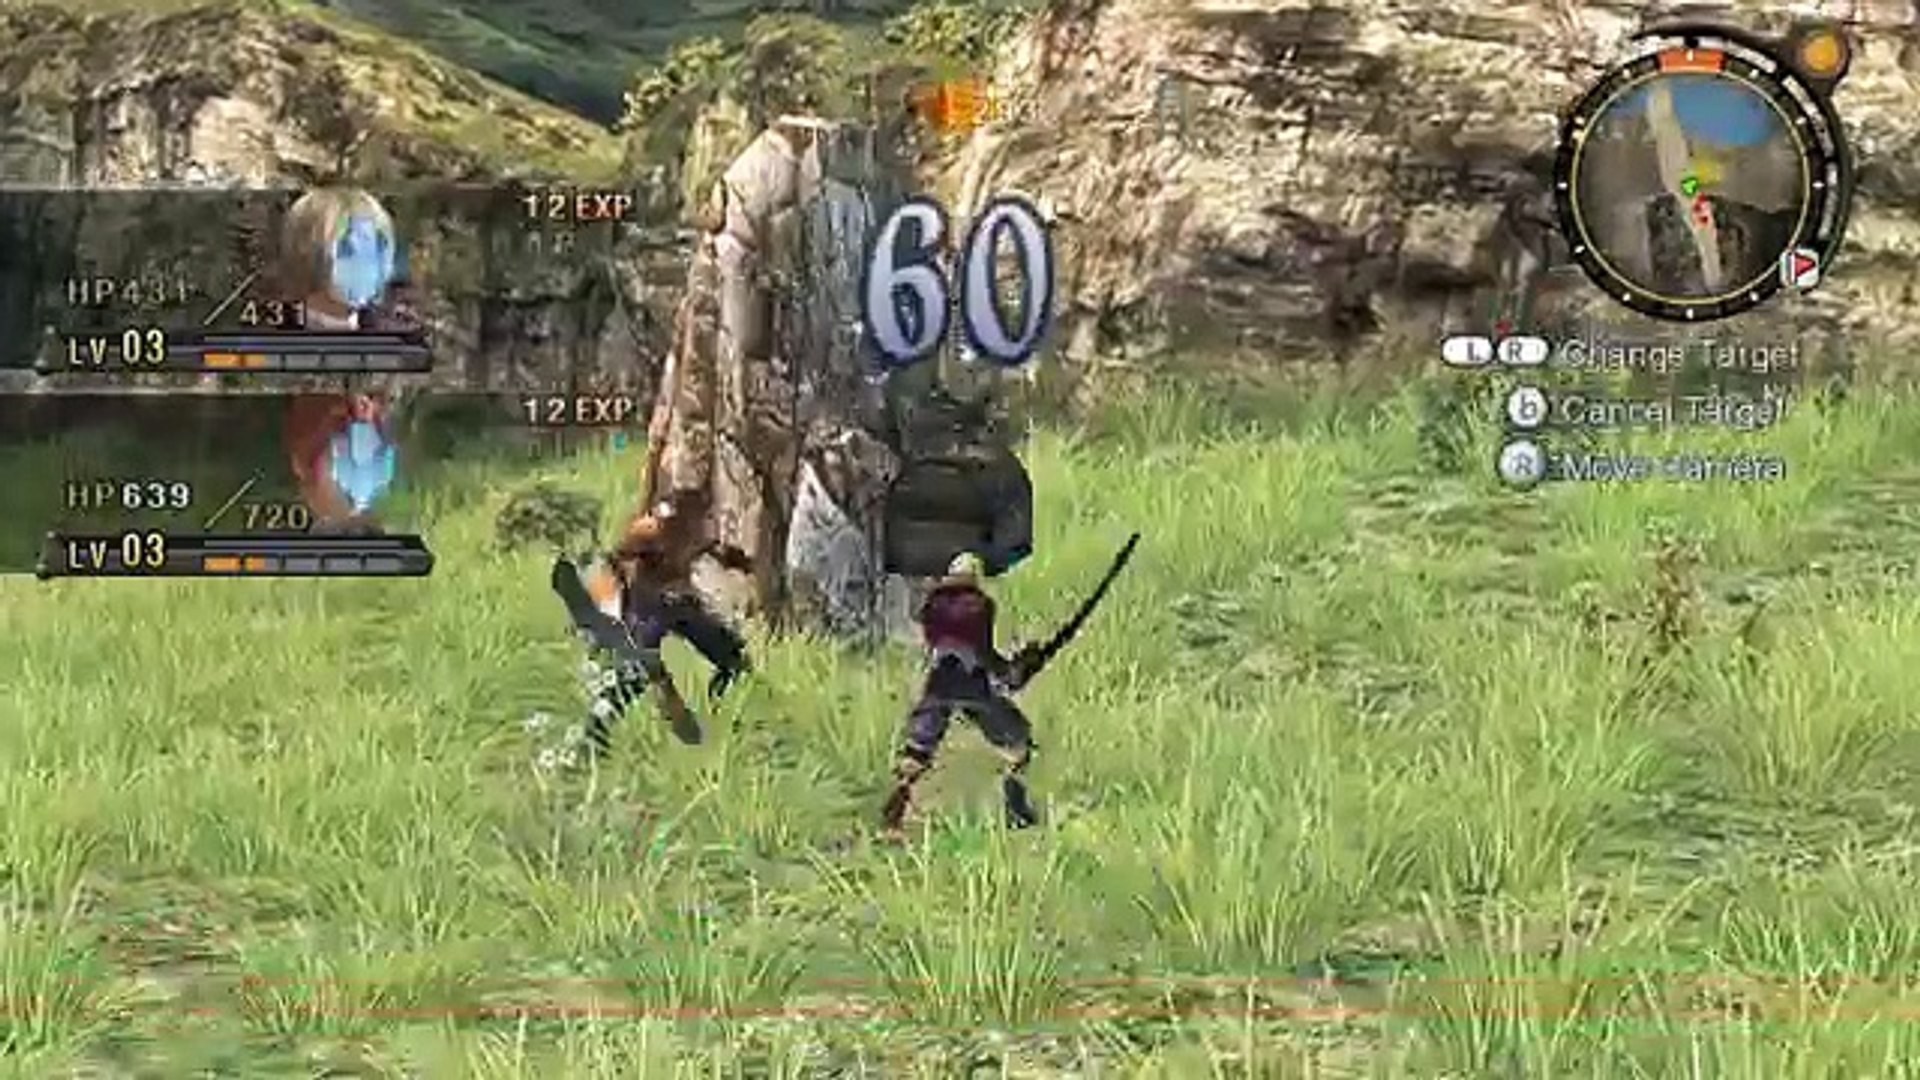 Xenoblade Chronicles 3 Future Redeemed release time - Video Games on Sports  Illustrated